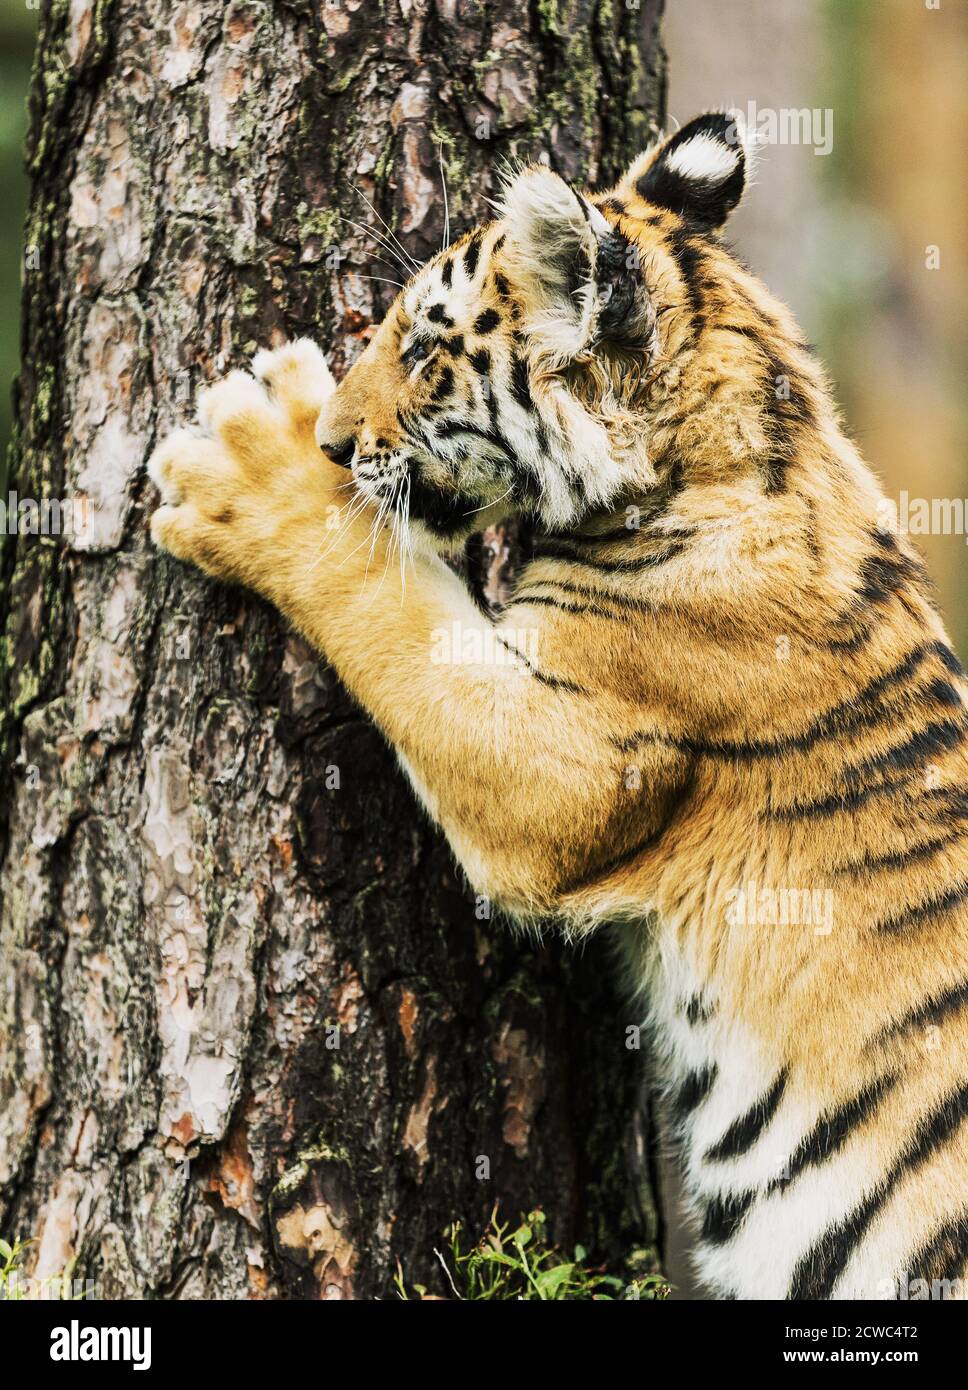 Little Ussuri tiger on a tree. Portrait of Usurian Tiger in a wild autumn landscape in sunny day. A young tiger in wildlife. Stock Photo